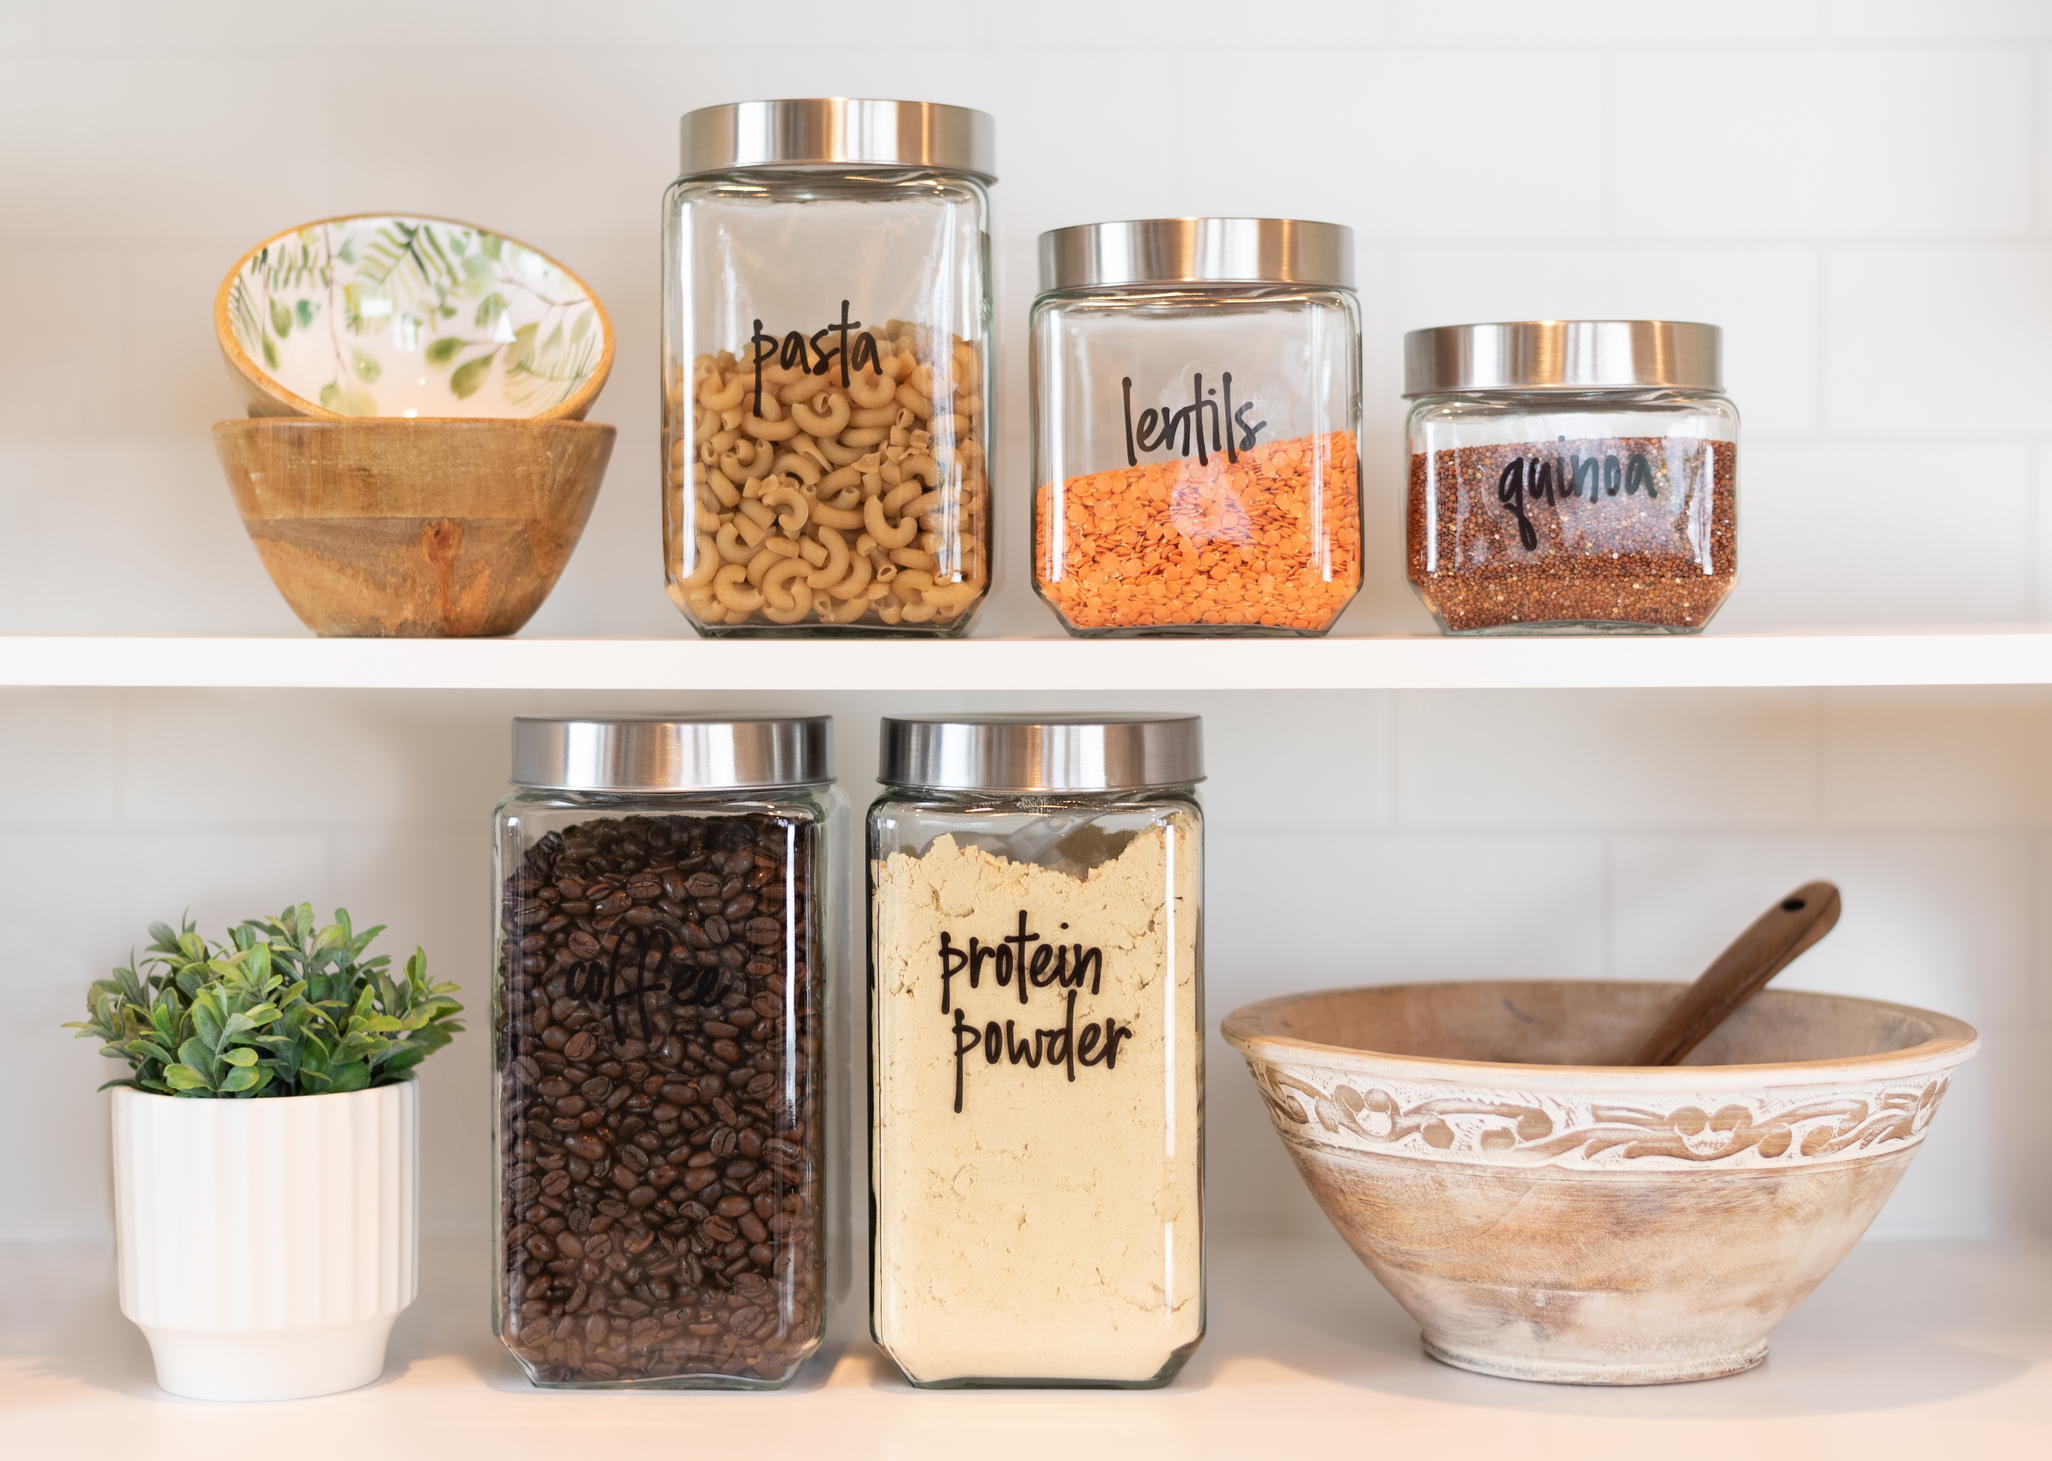 Are Clear Pantry Storage Containers Actually Worth It?